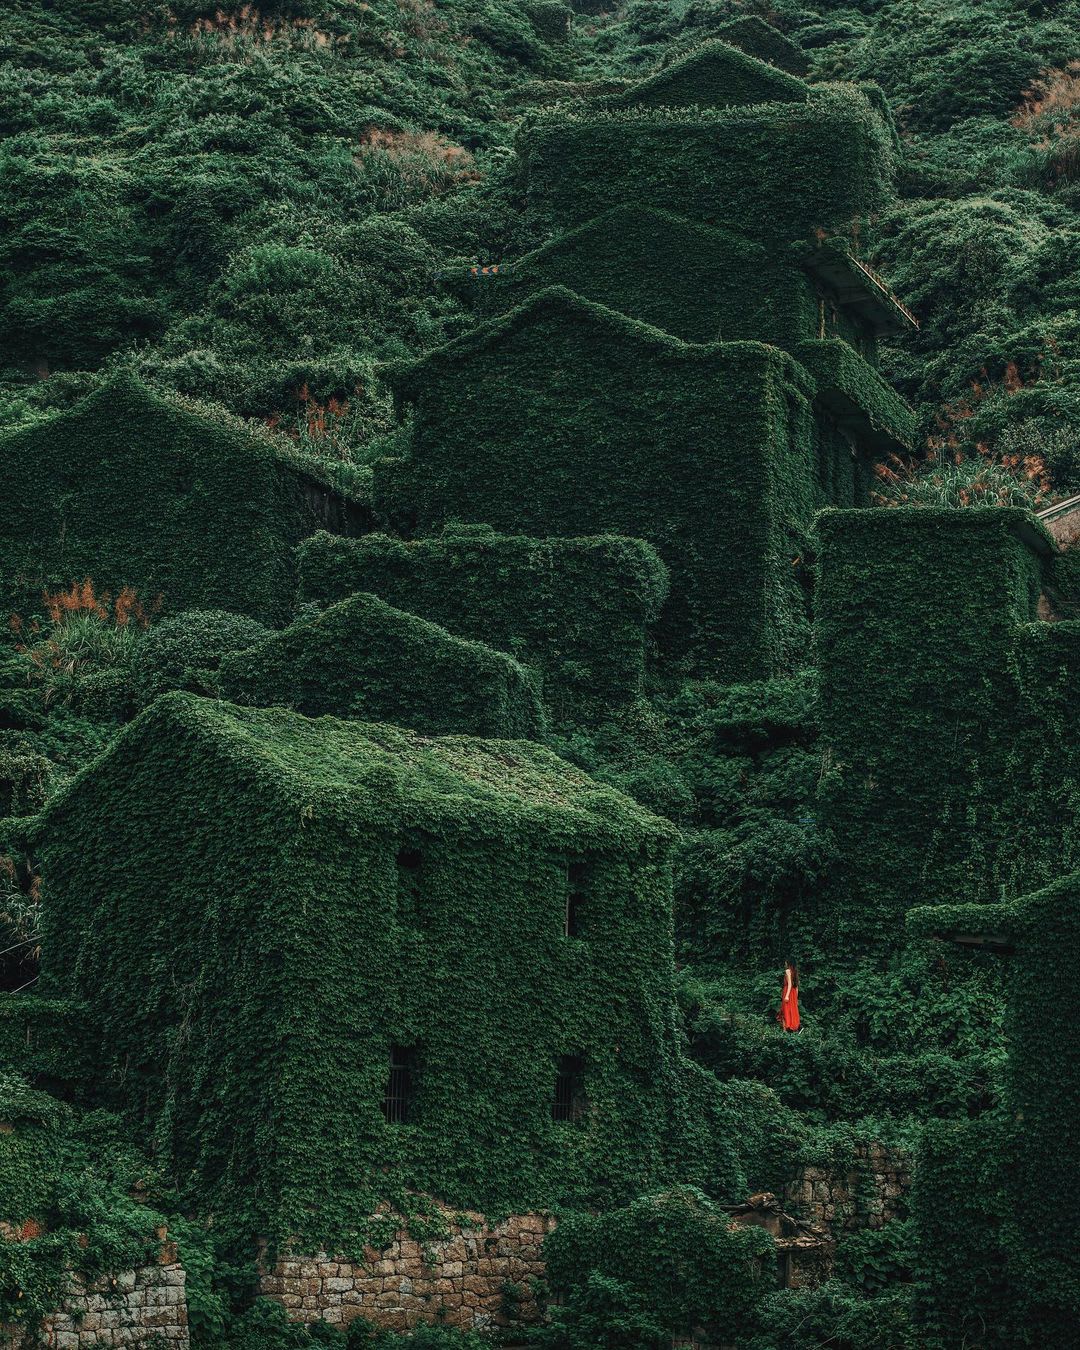 Overgrown vines covering the houses of Houtouwan, an abandoned fishing village on one of the Shengsi Islands, a chain of 400 islands located 40 miles east of Shanghai, China.